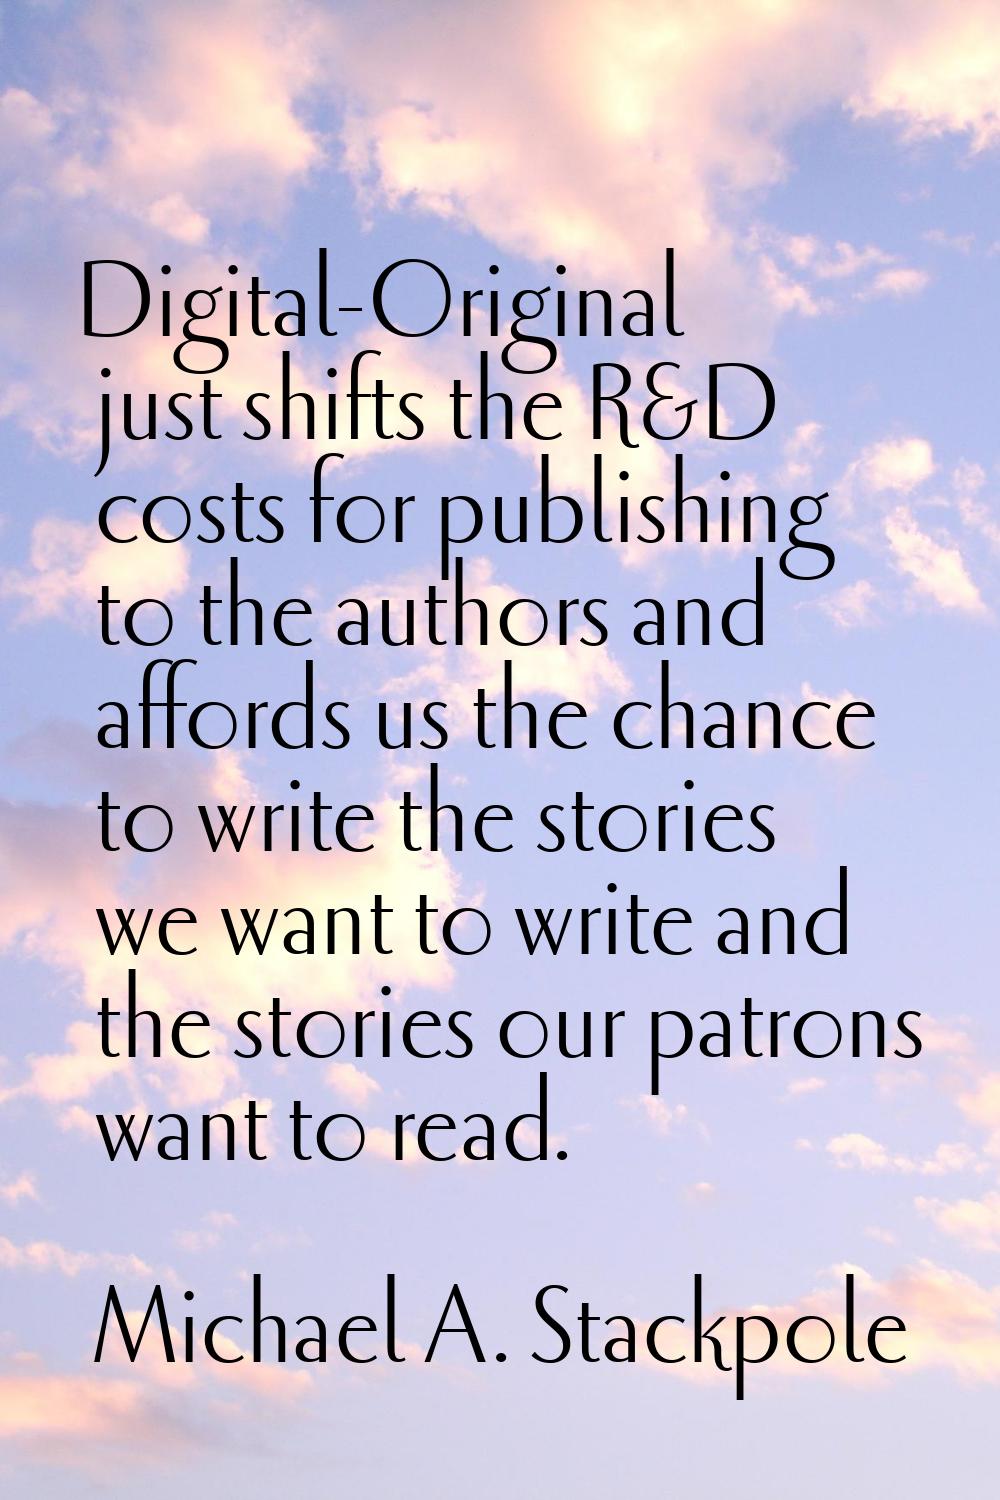 Digital-Original just shifts the R&D costs for publishing to the authors and affords us the chance 